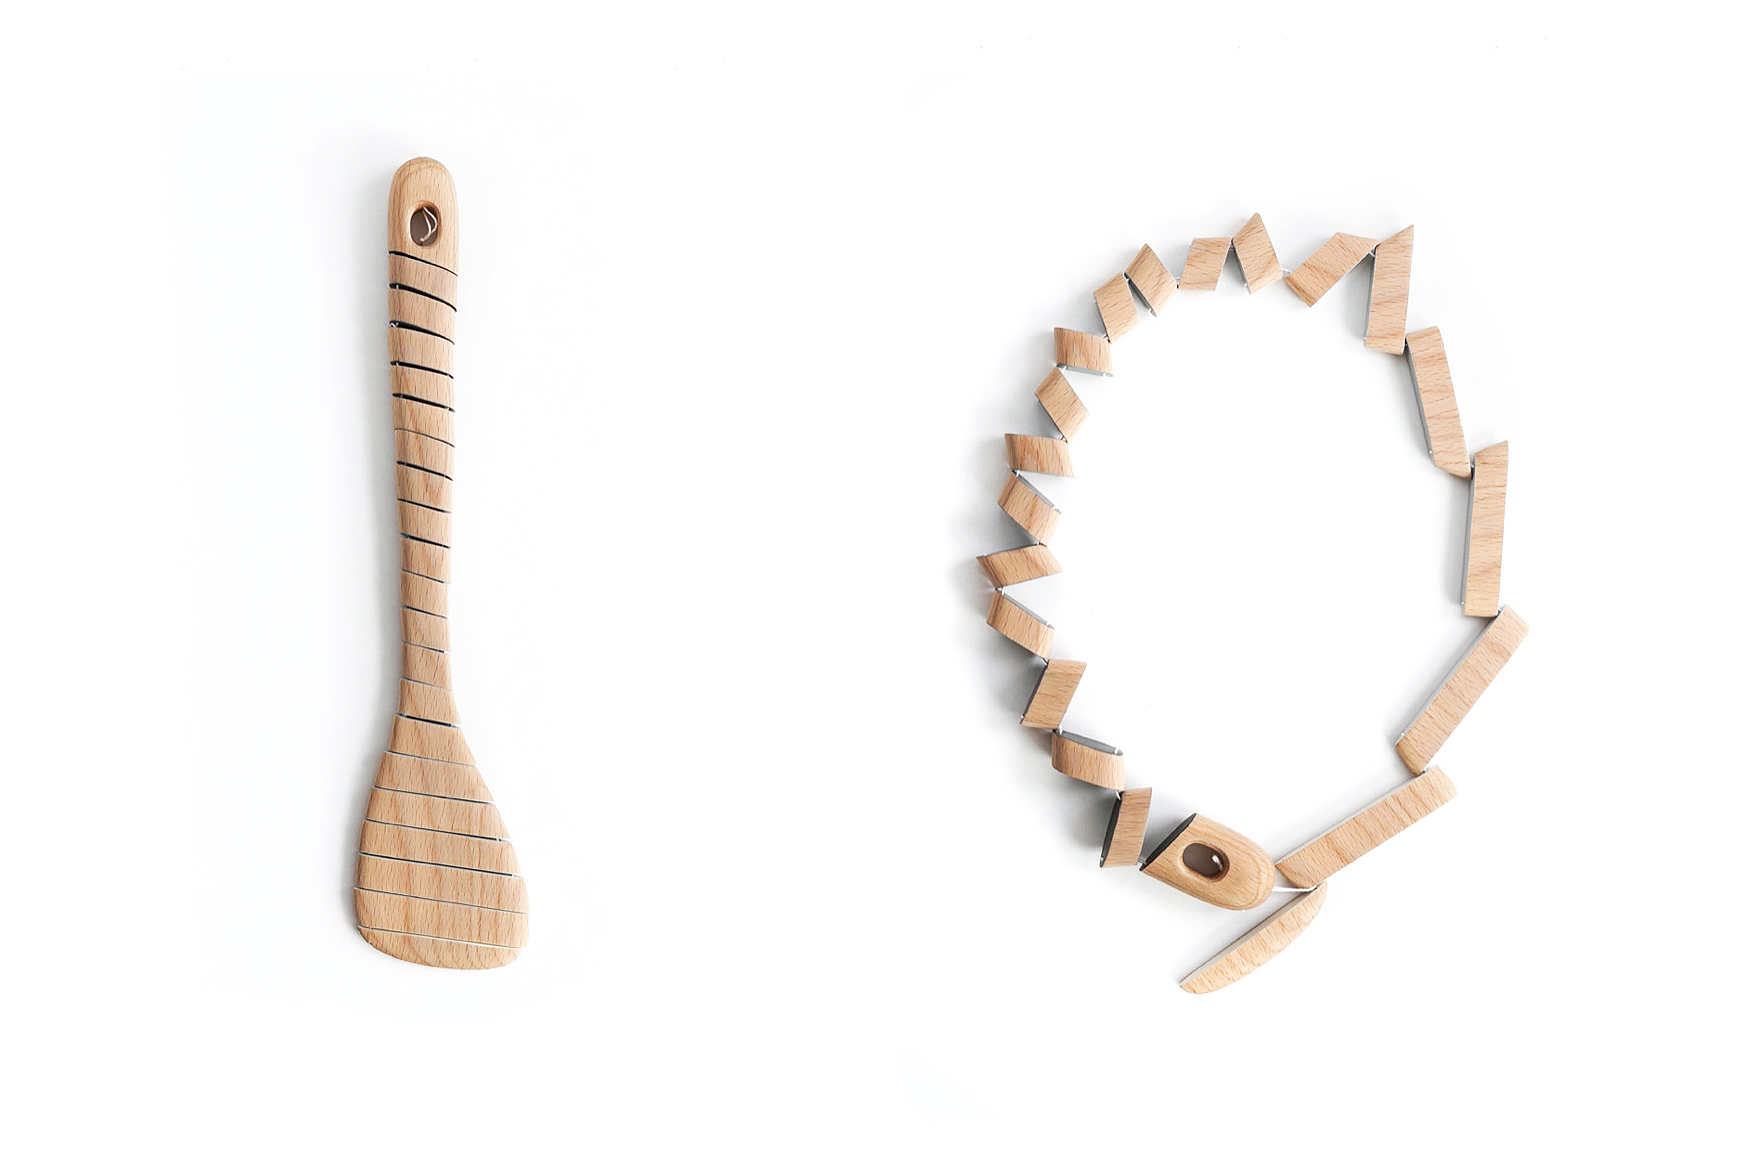 wooden spatula or necklace?